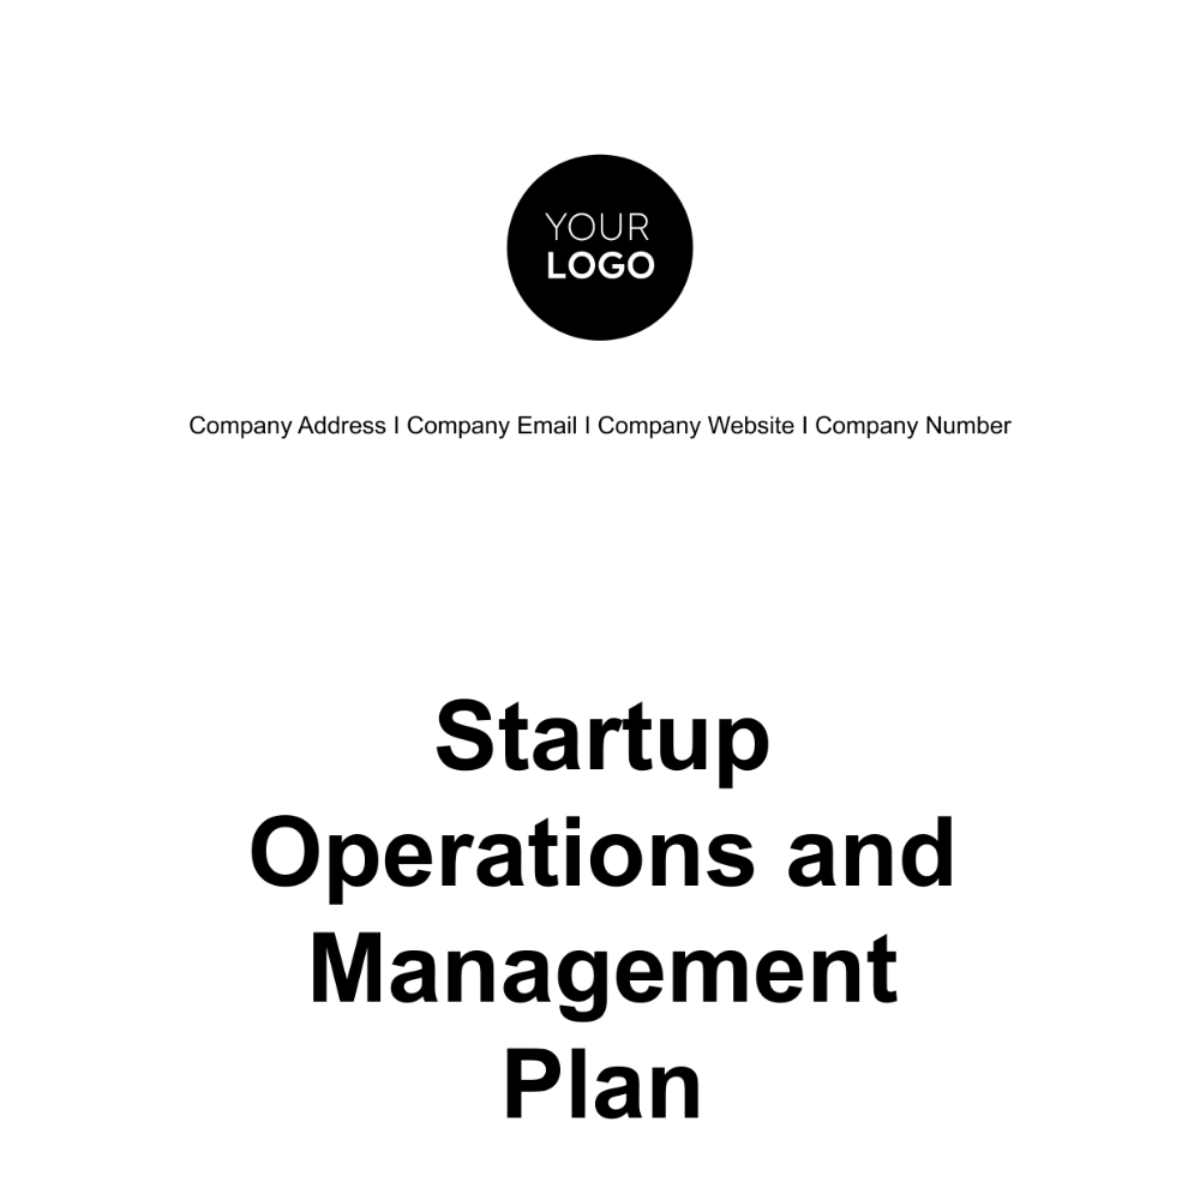 Startup Operations and Management Plan Template